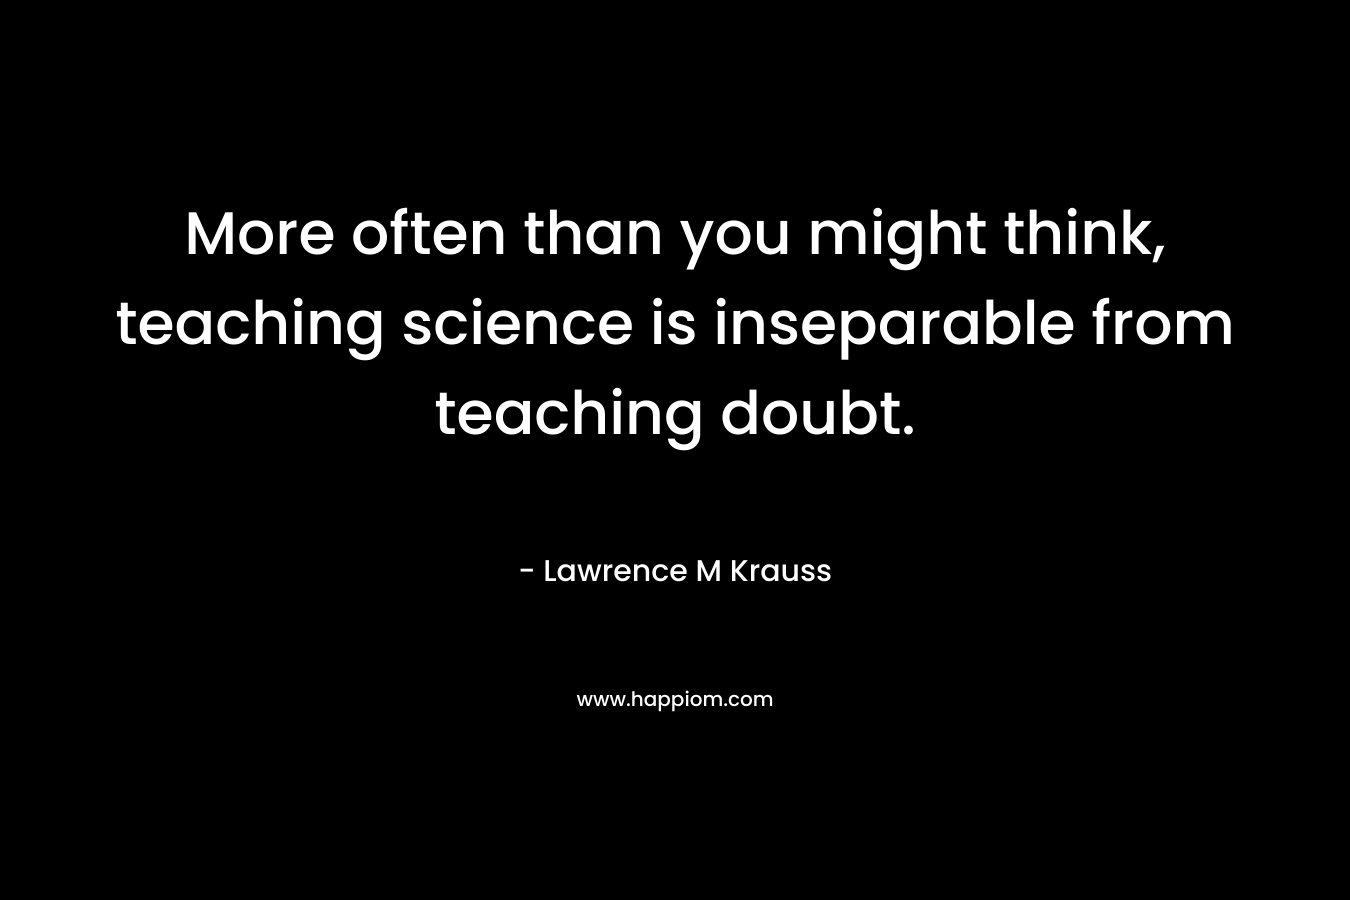 More often than you might think, teaching science is inseparable from teaching doubt.